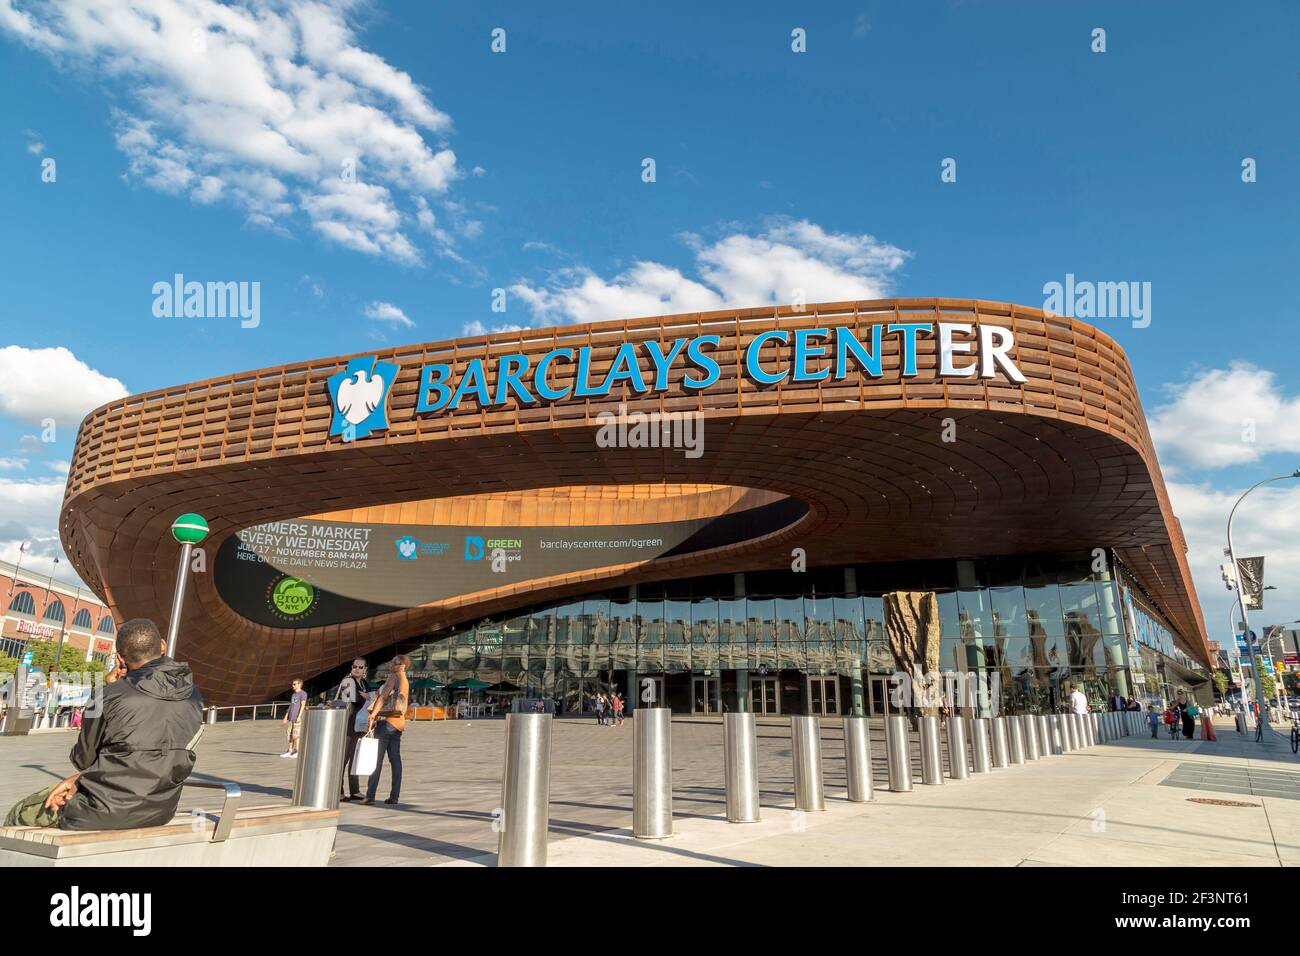 Entrance To Barclays Center Brooklyn NYC Editorial Stock Photo